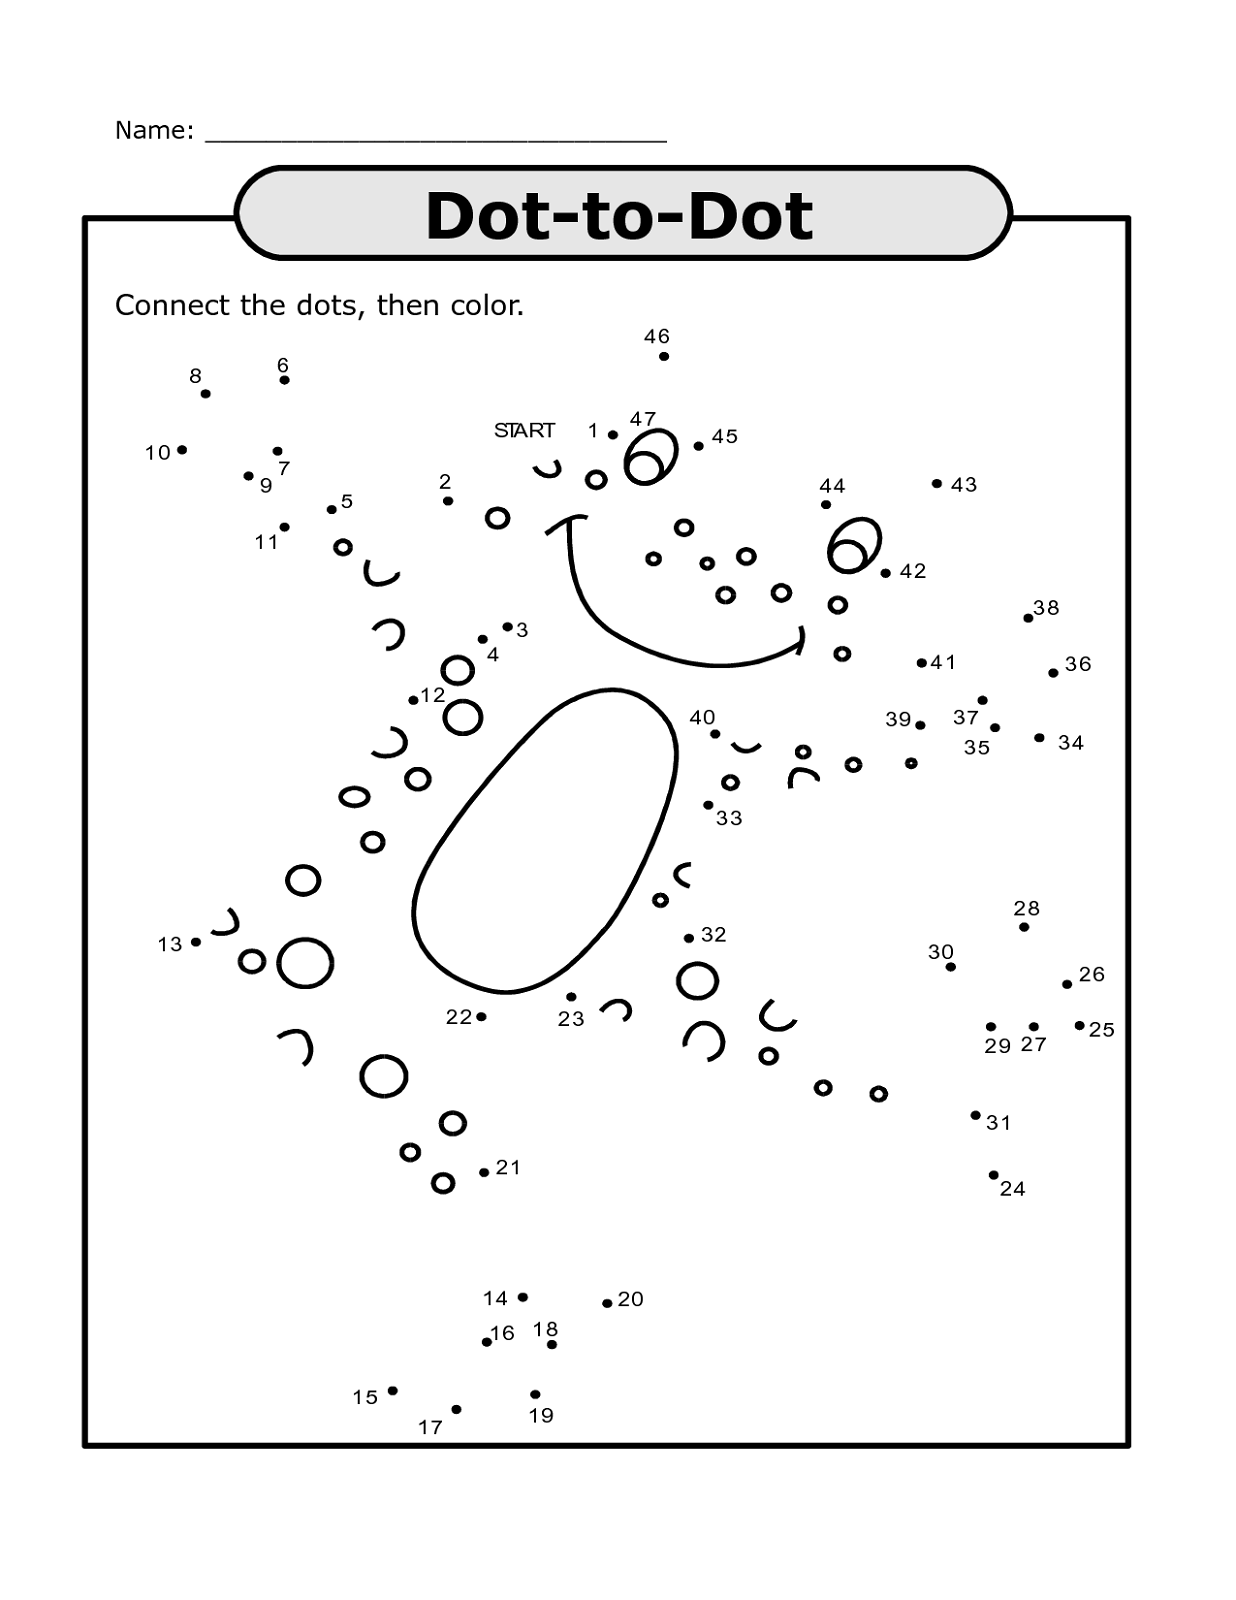 join-the-dots-free